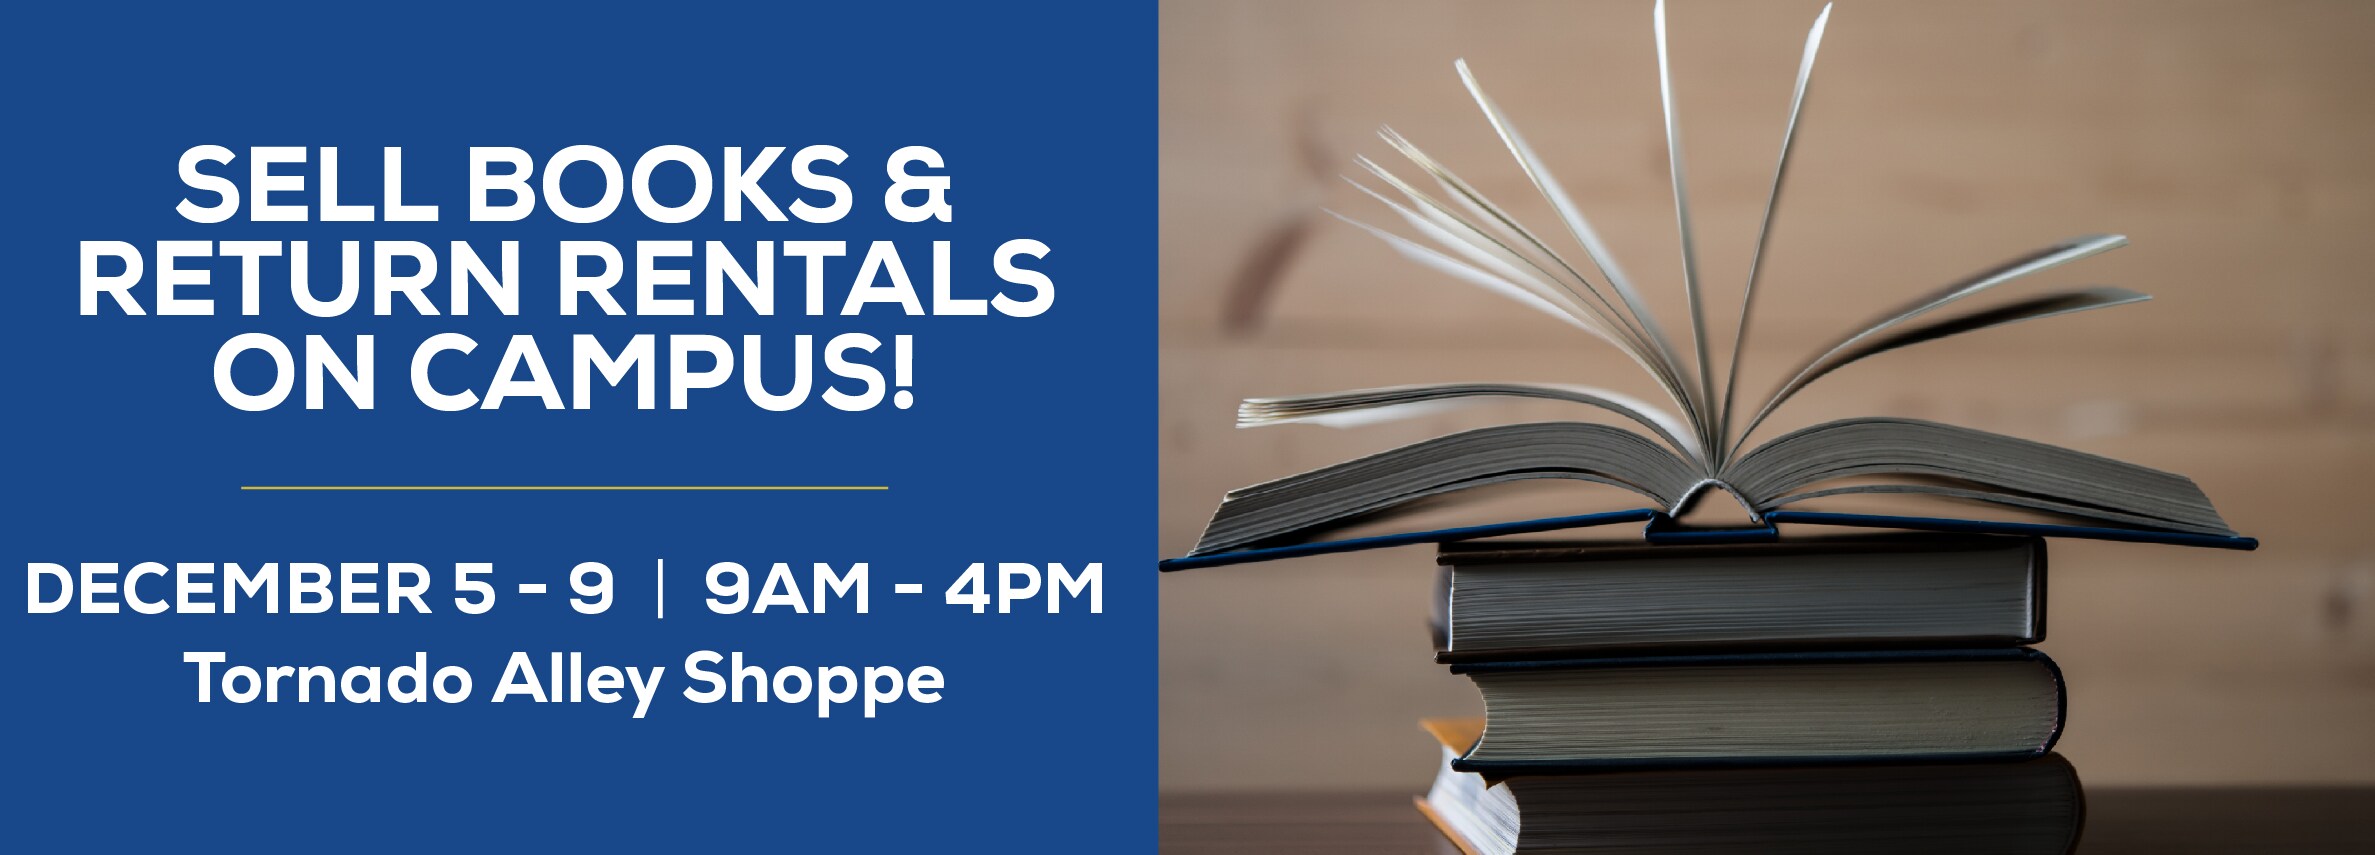 Sell your books and return your rentals! December 5th through 9th. 9 am - 4pm. Tornado Alley Shoppe/